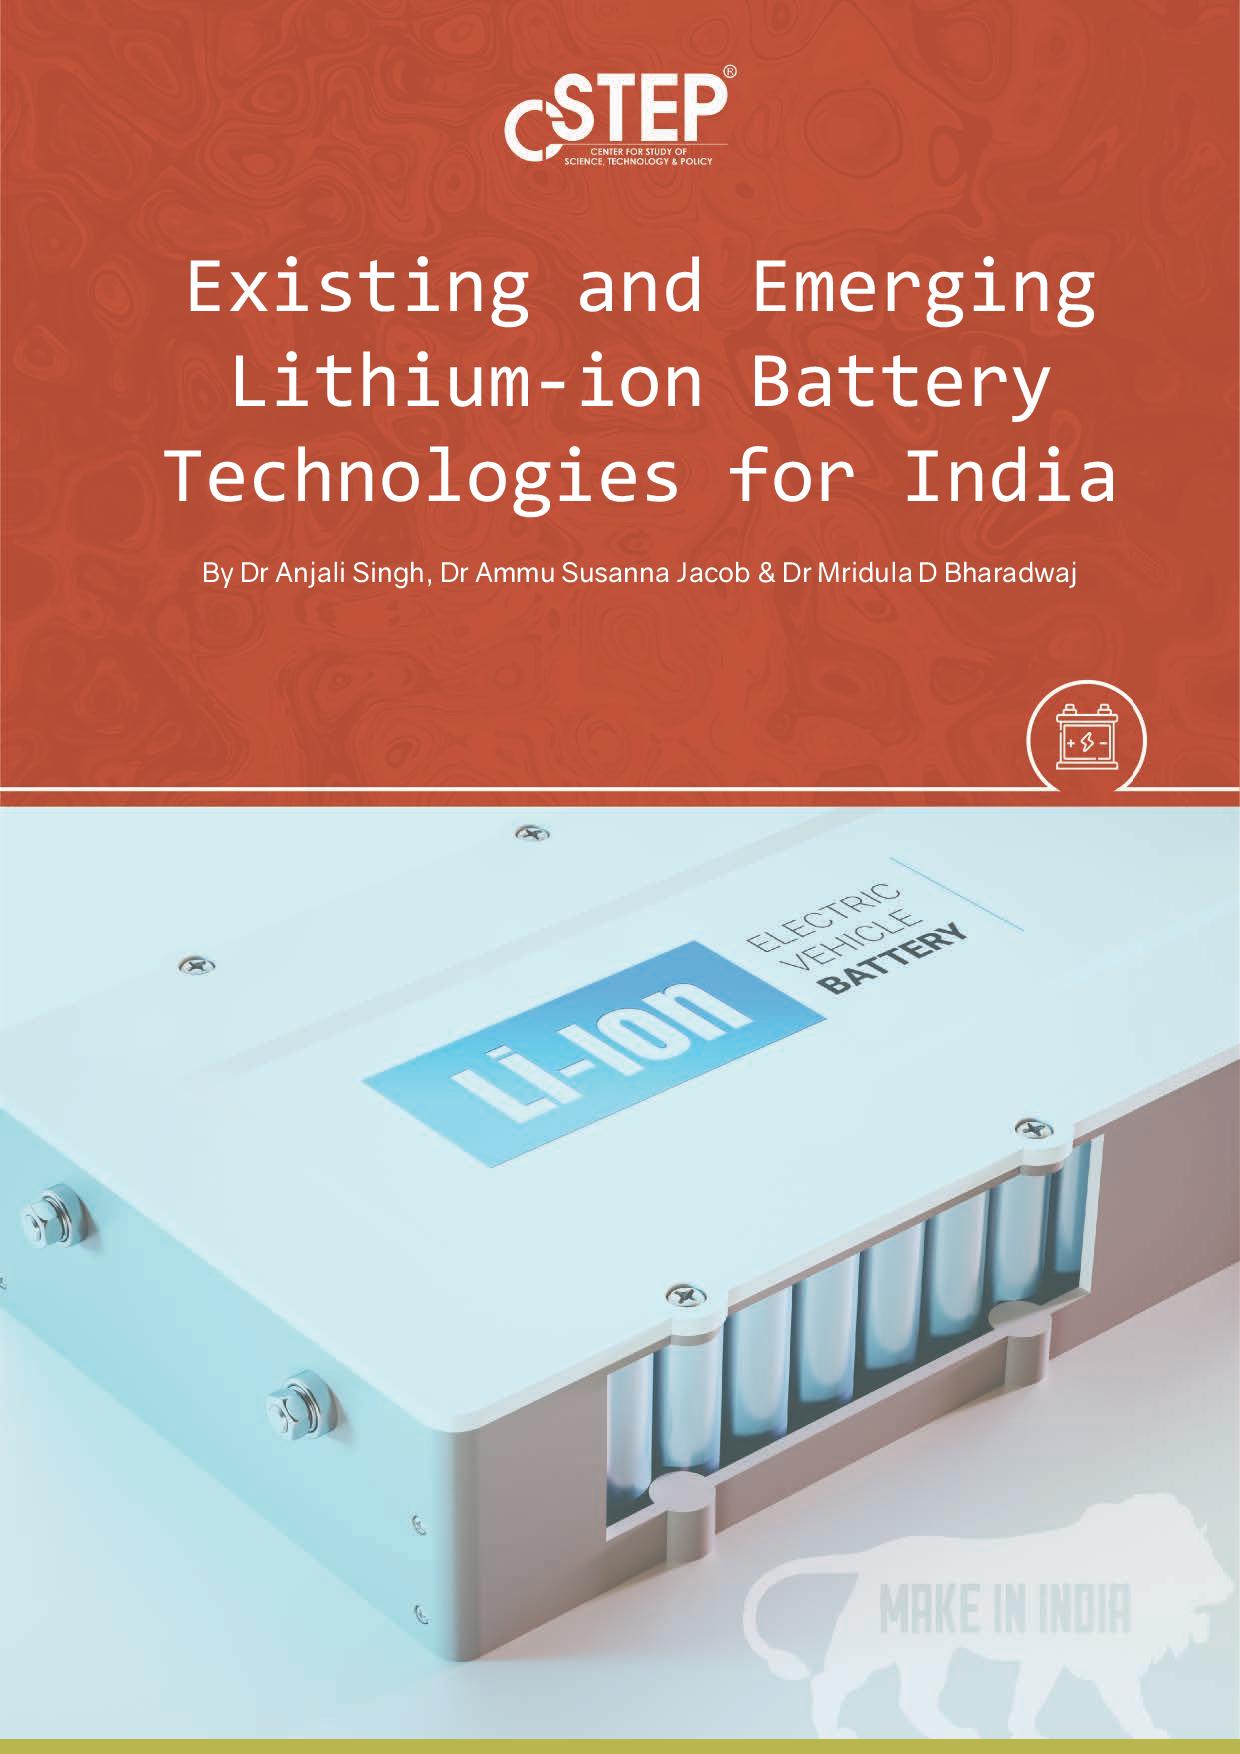 Existing and Emerging Lithium-ion Battery Technologies for India